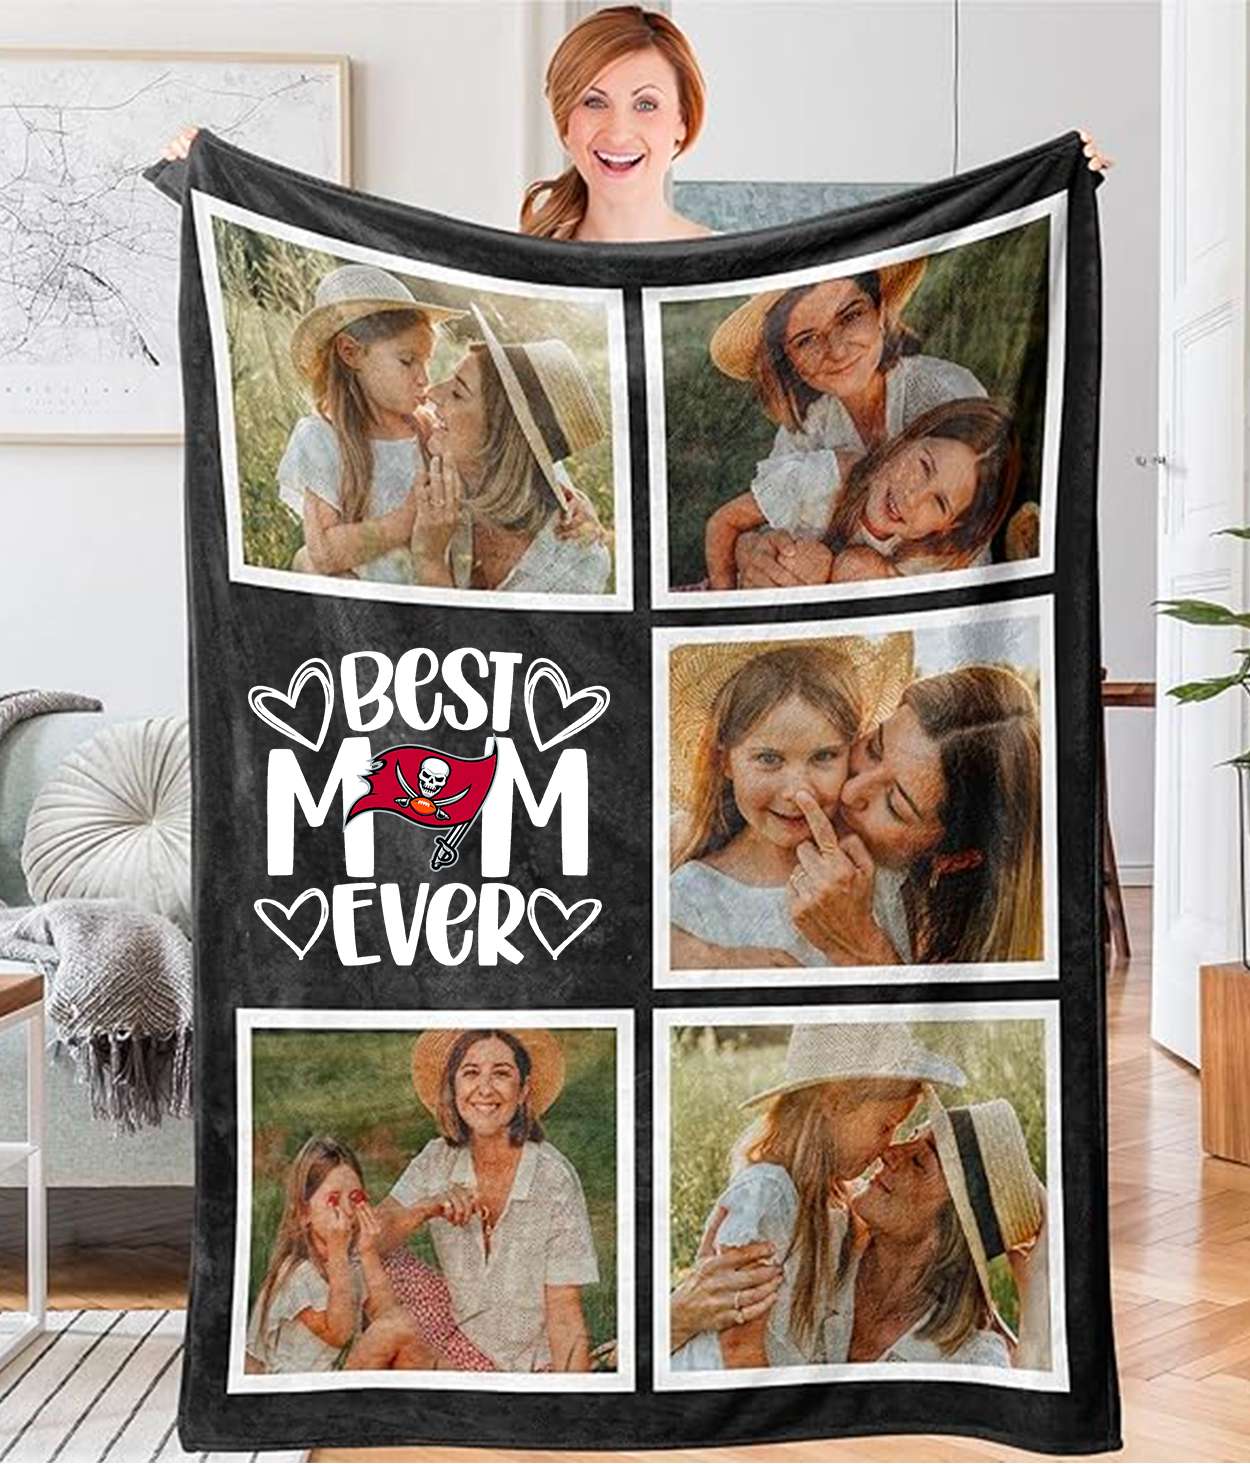 Best Mom Ever - Custom NFL Tampa Bay Buccaneers Blankets with Pictures for Mother's Day Gift